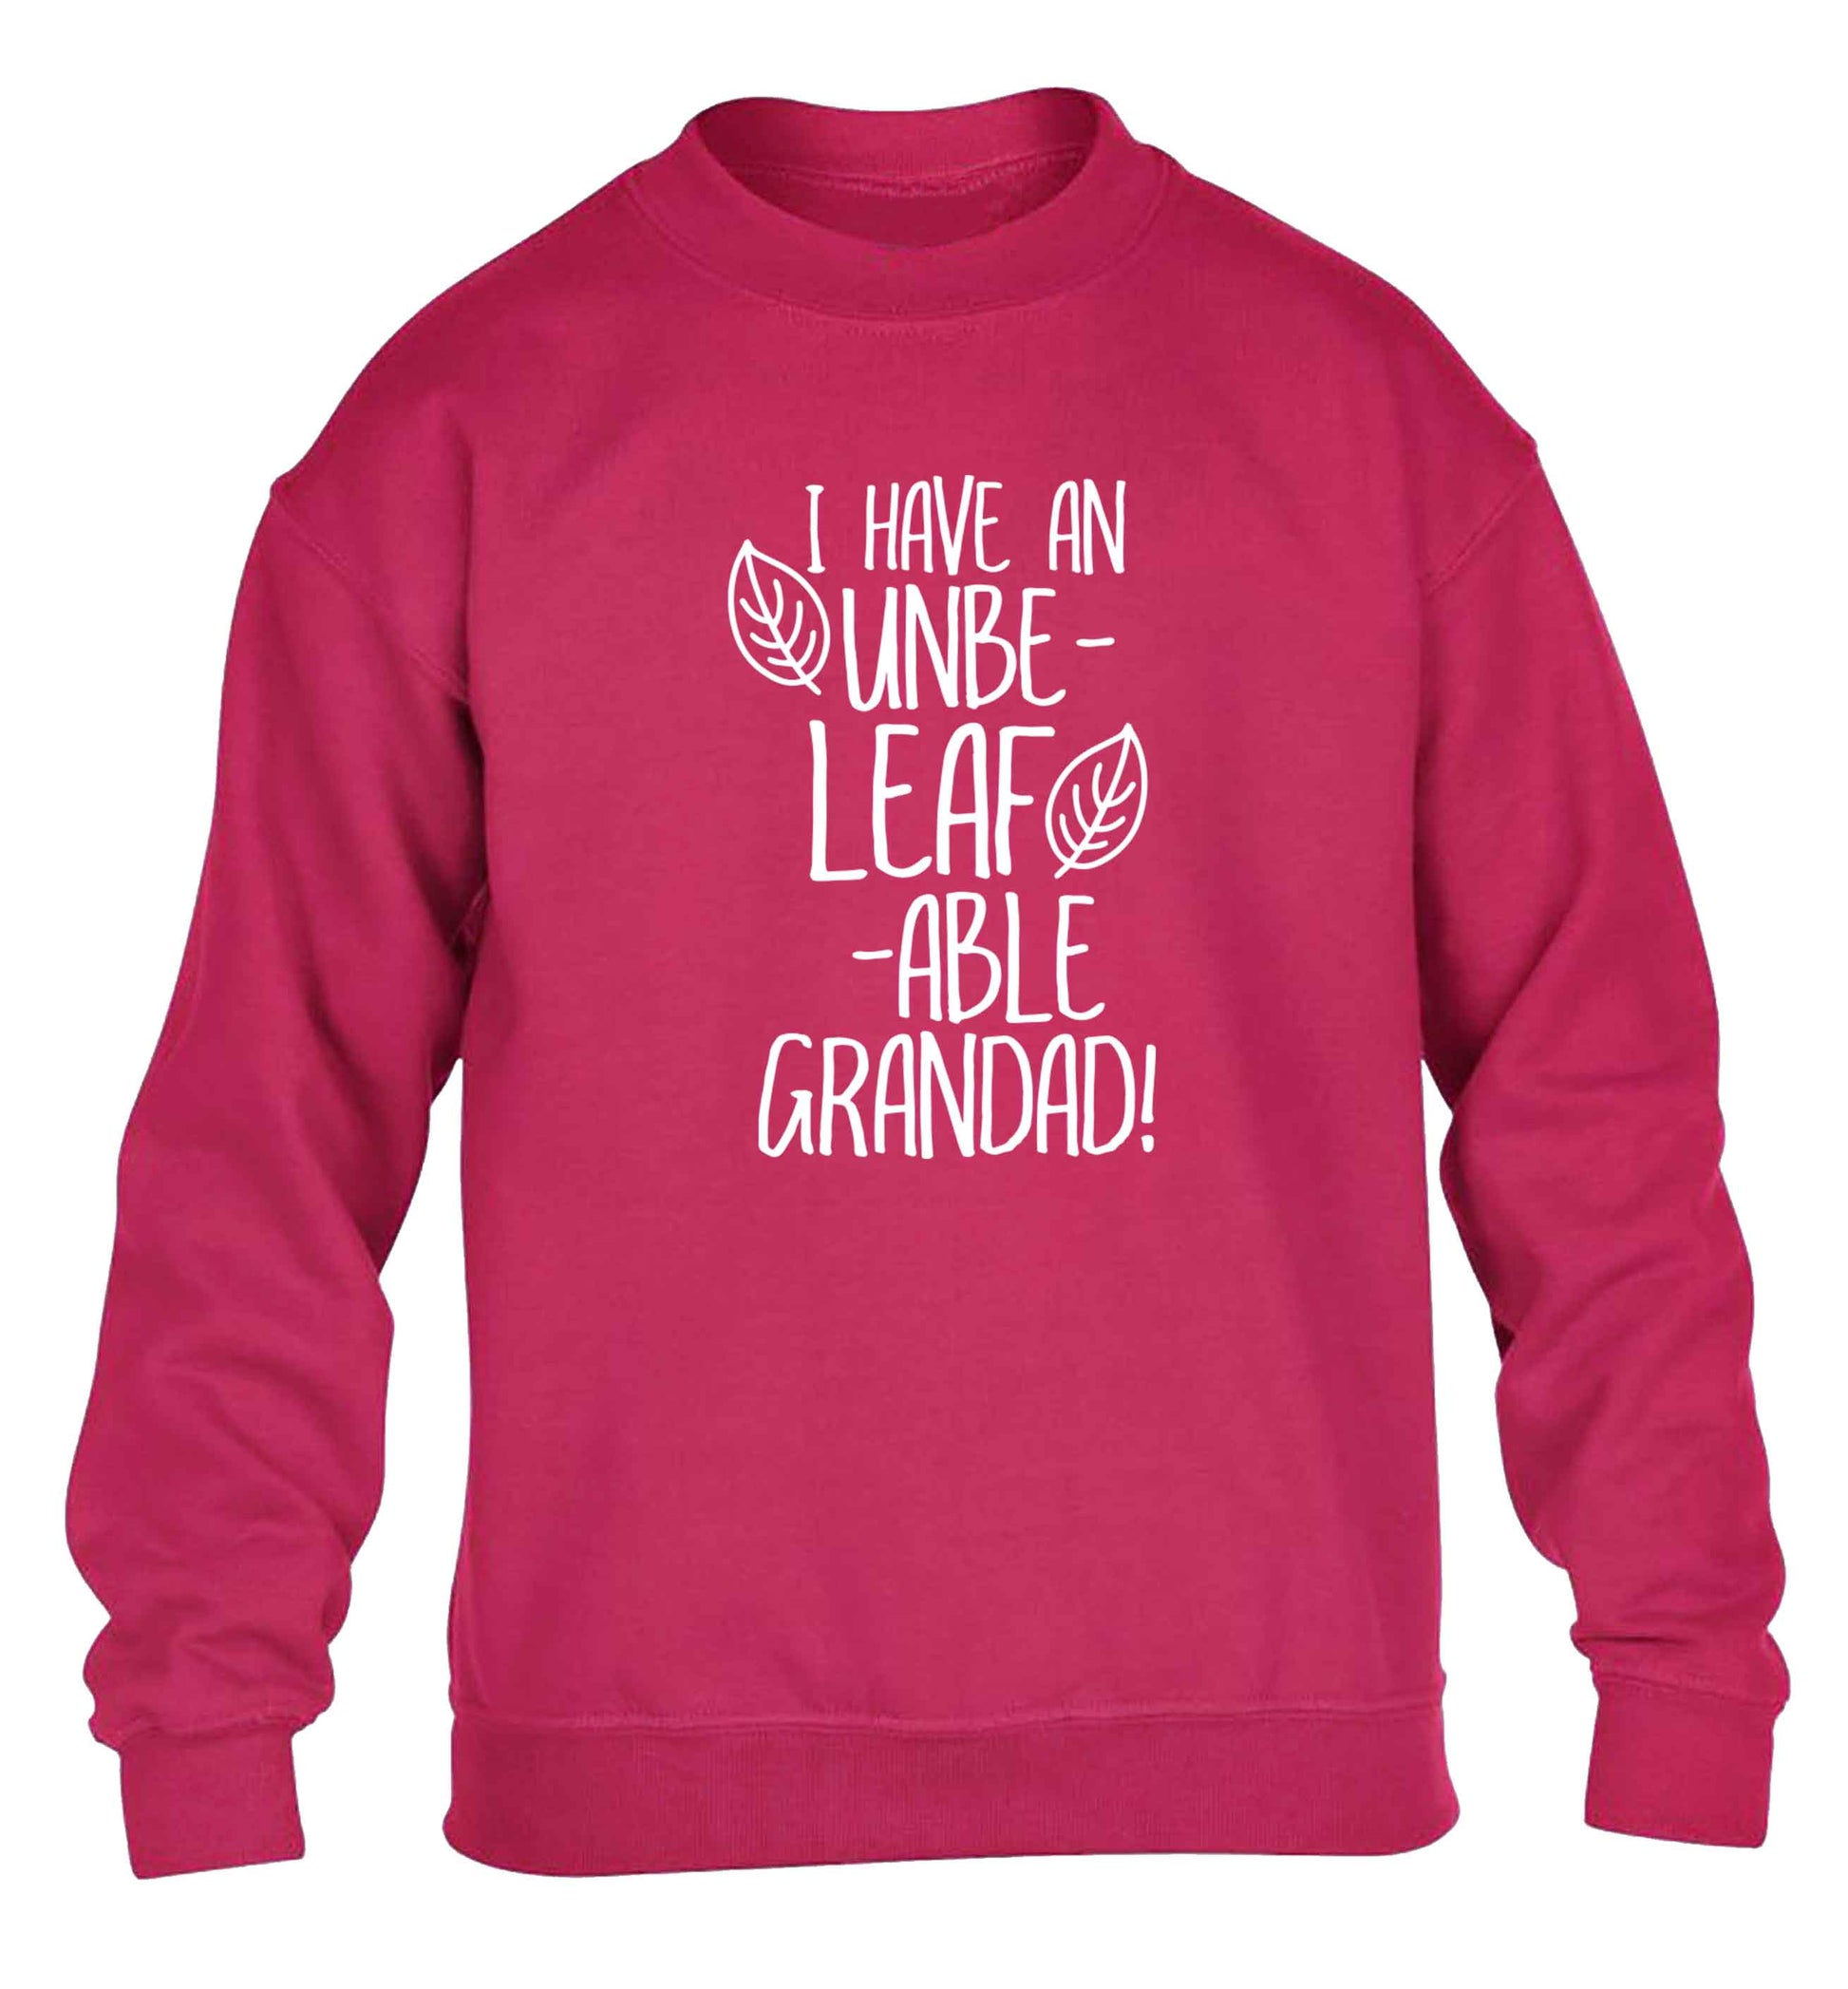 I have an unbe-leaf-able grandad children's pink sweater 12-13 Years